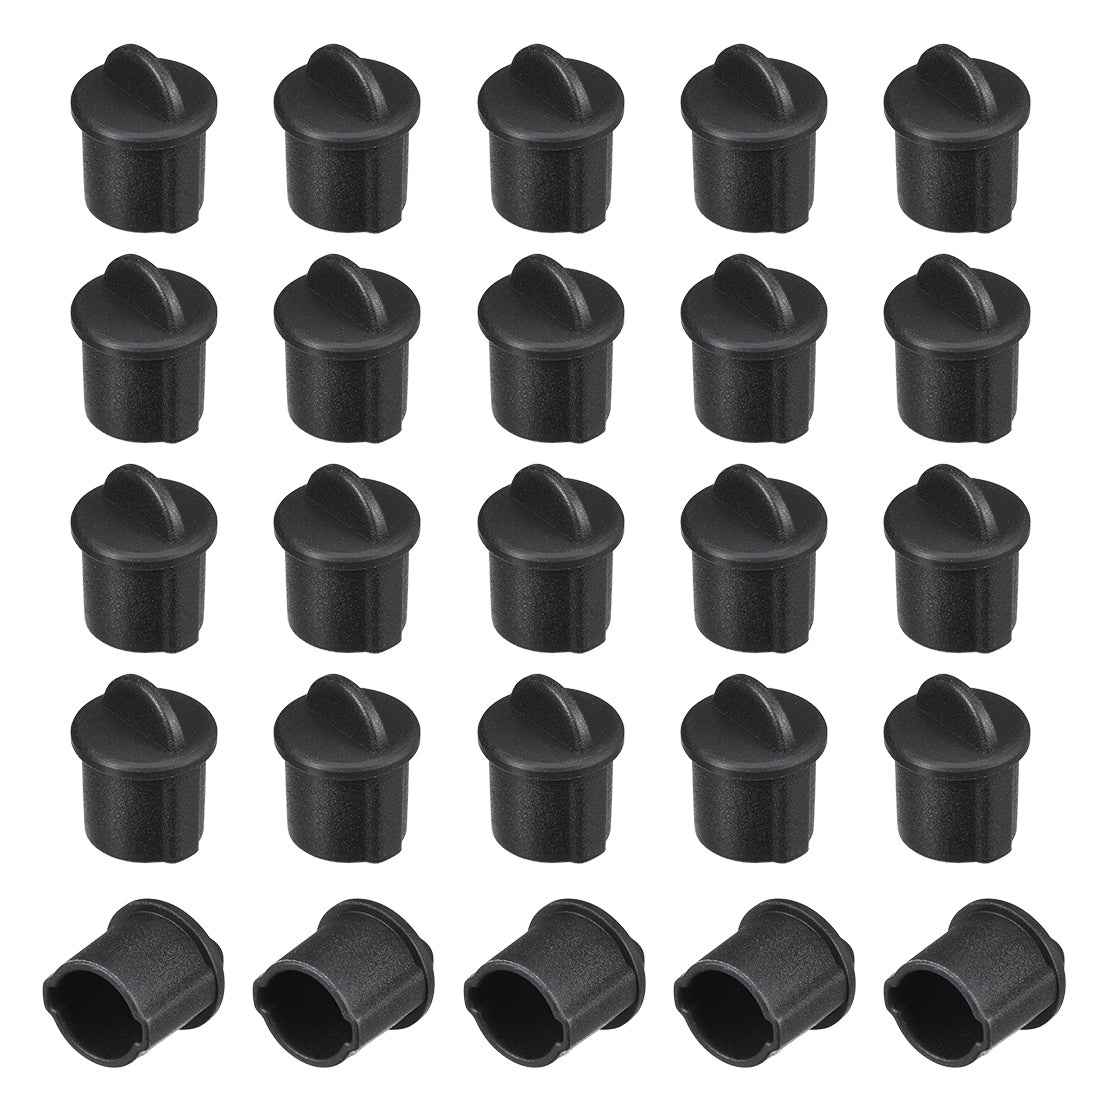 uxcell Uxcell Silicone BNC Anti-Dust Stopper Cap Cover for Female Jack Black 20pcs